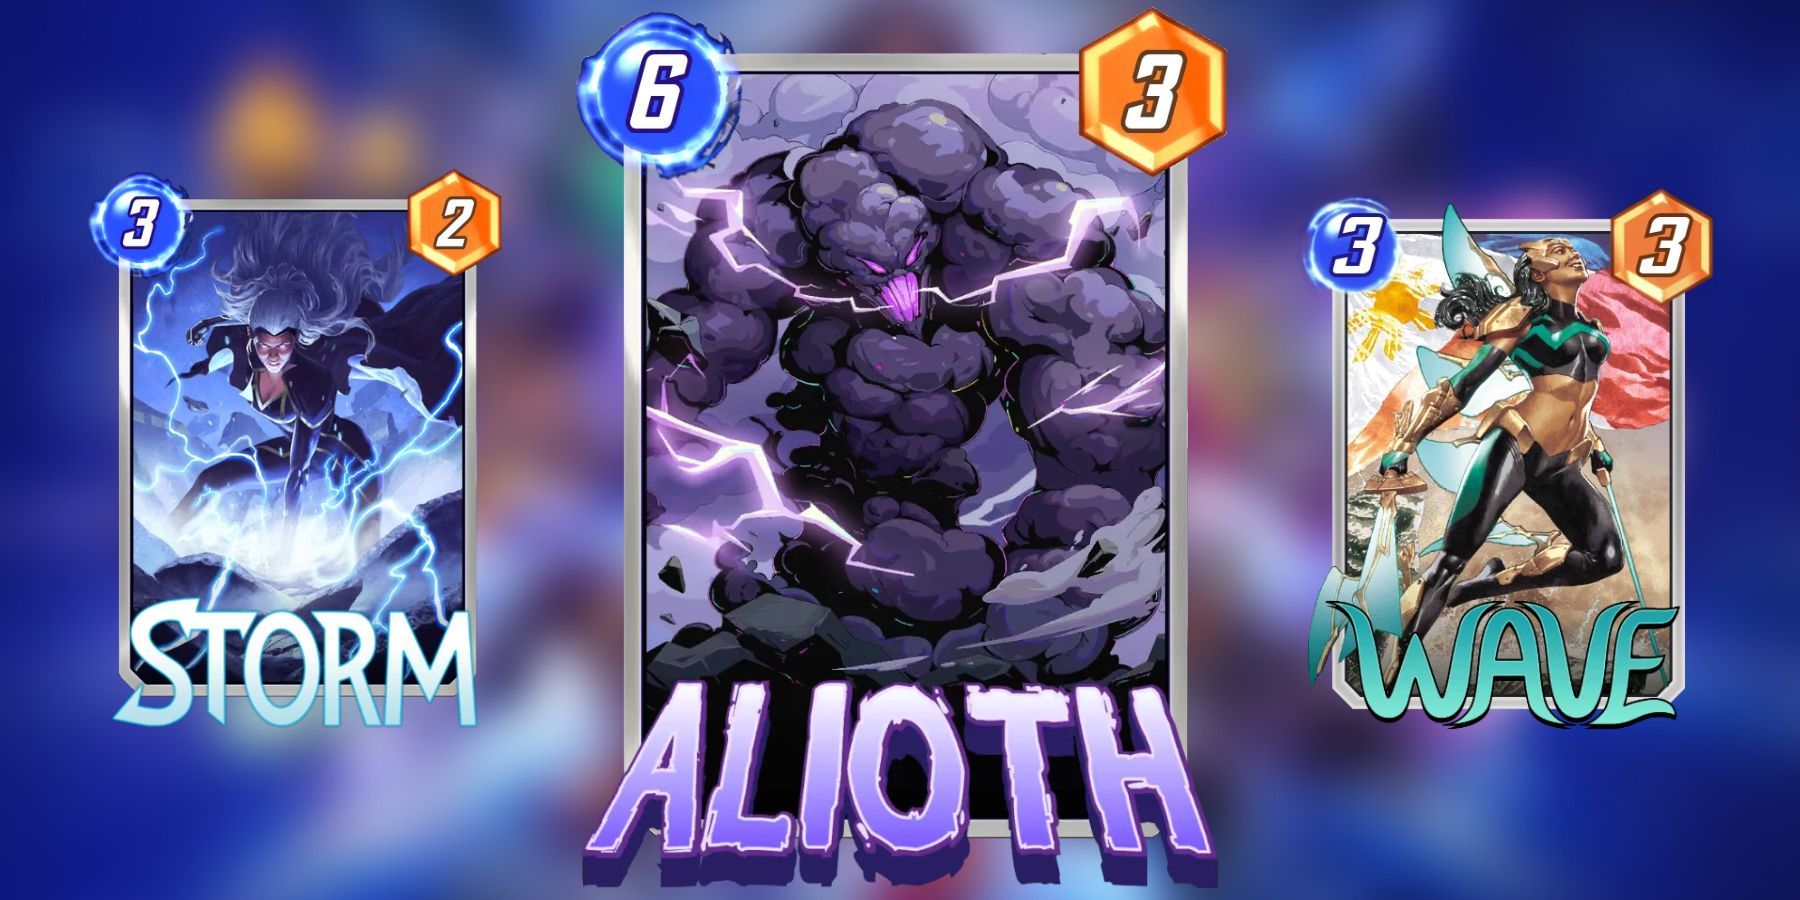 alioth, storm, and wave cards in marvel snap.